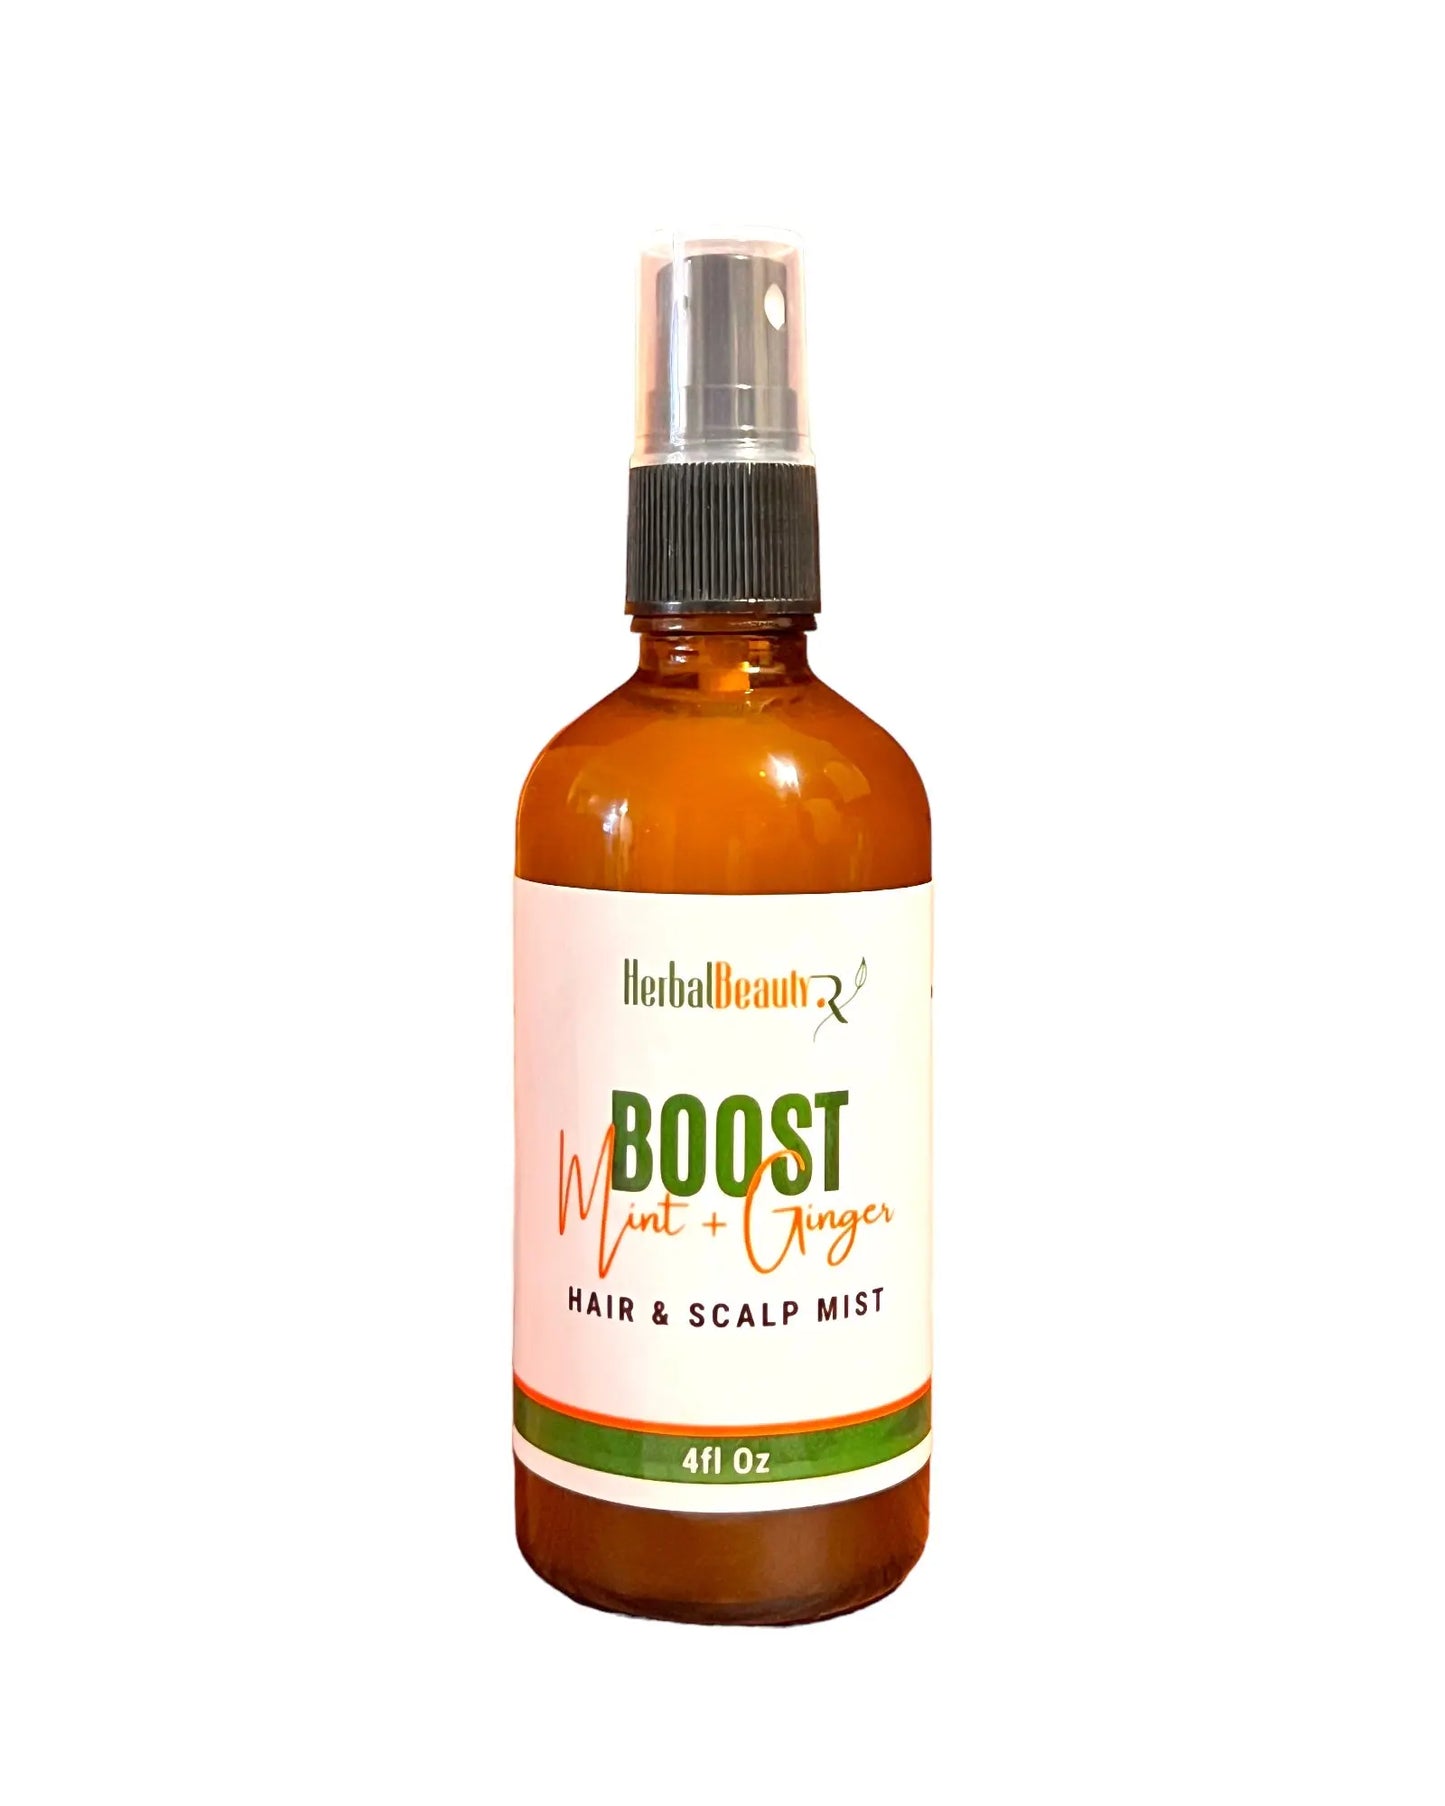 Hair growth Mist Designed to thicken hair & Stop Hair Loss